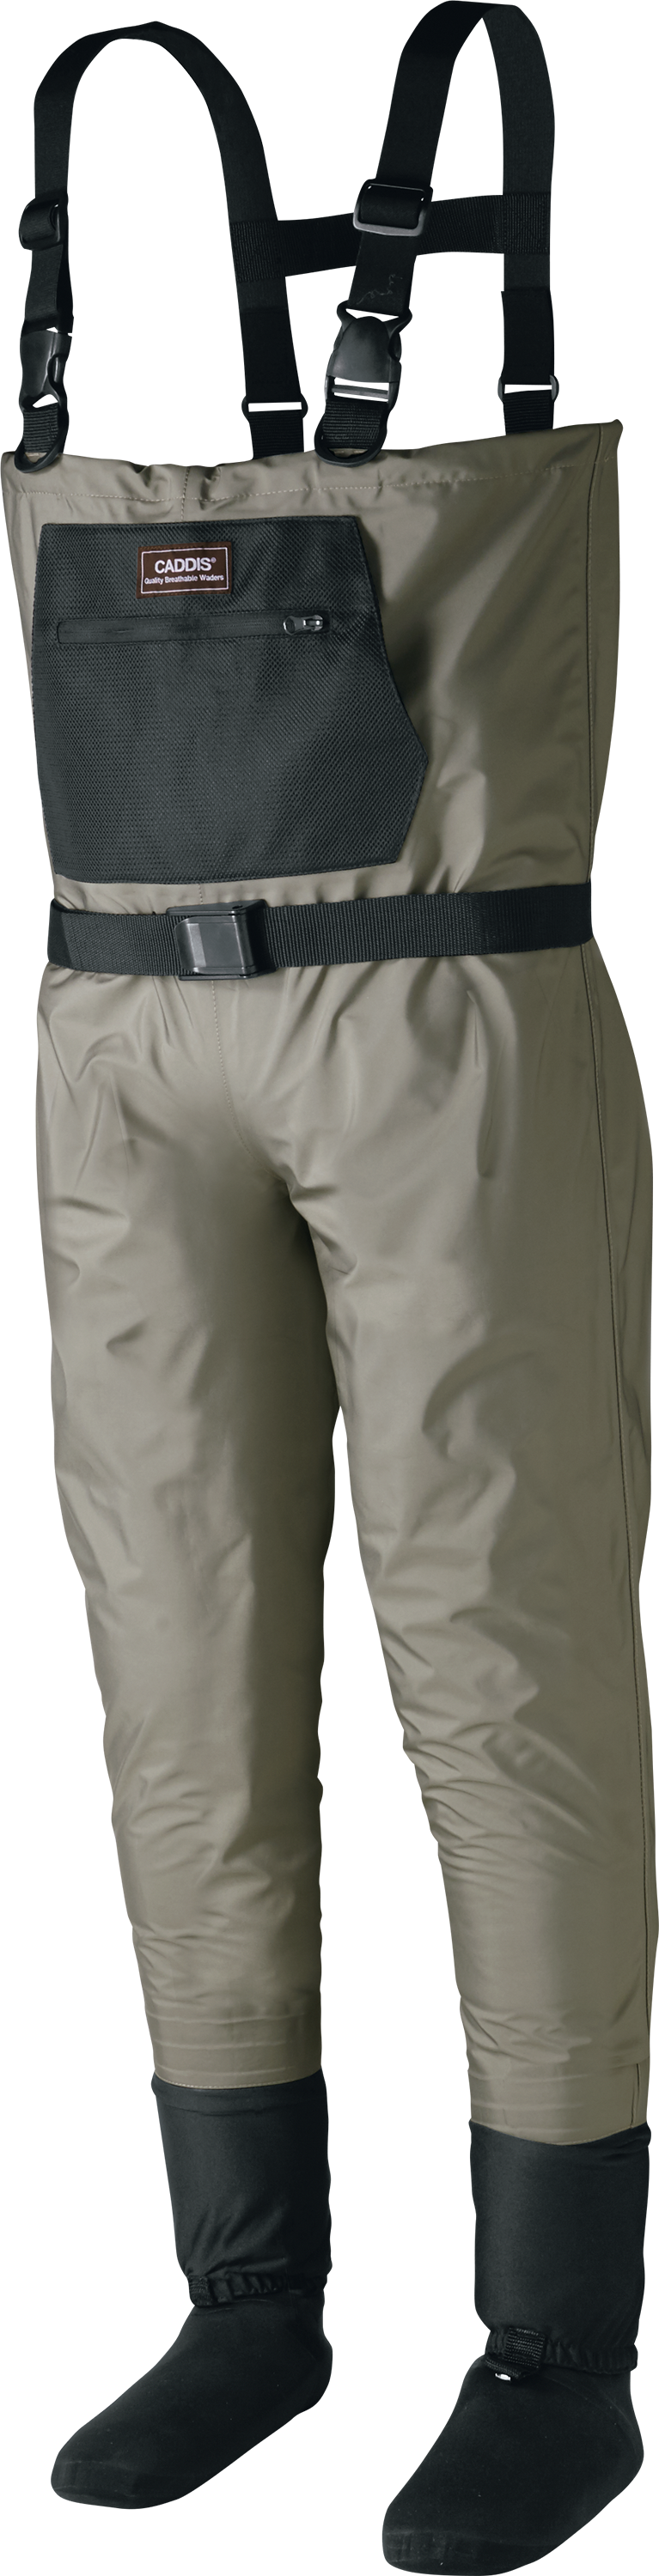 Caddis Men's Taupe Affordable Breathable Stocking Foot Wader, X-Large Short  Stou